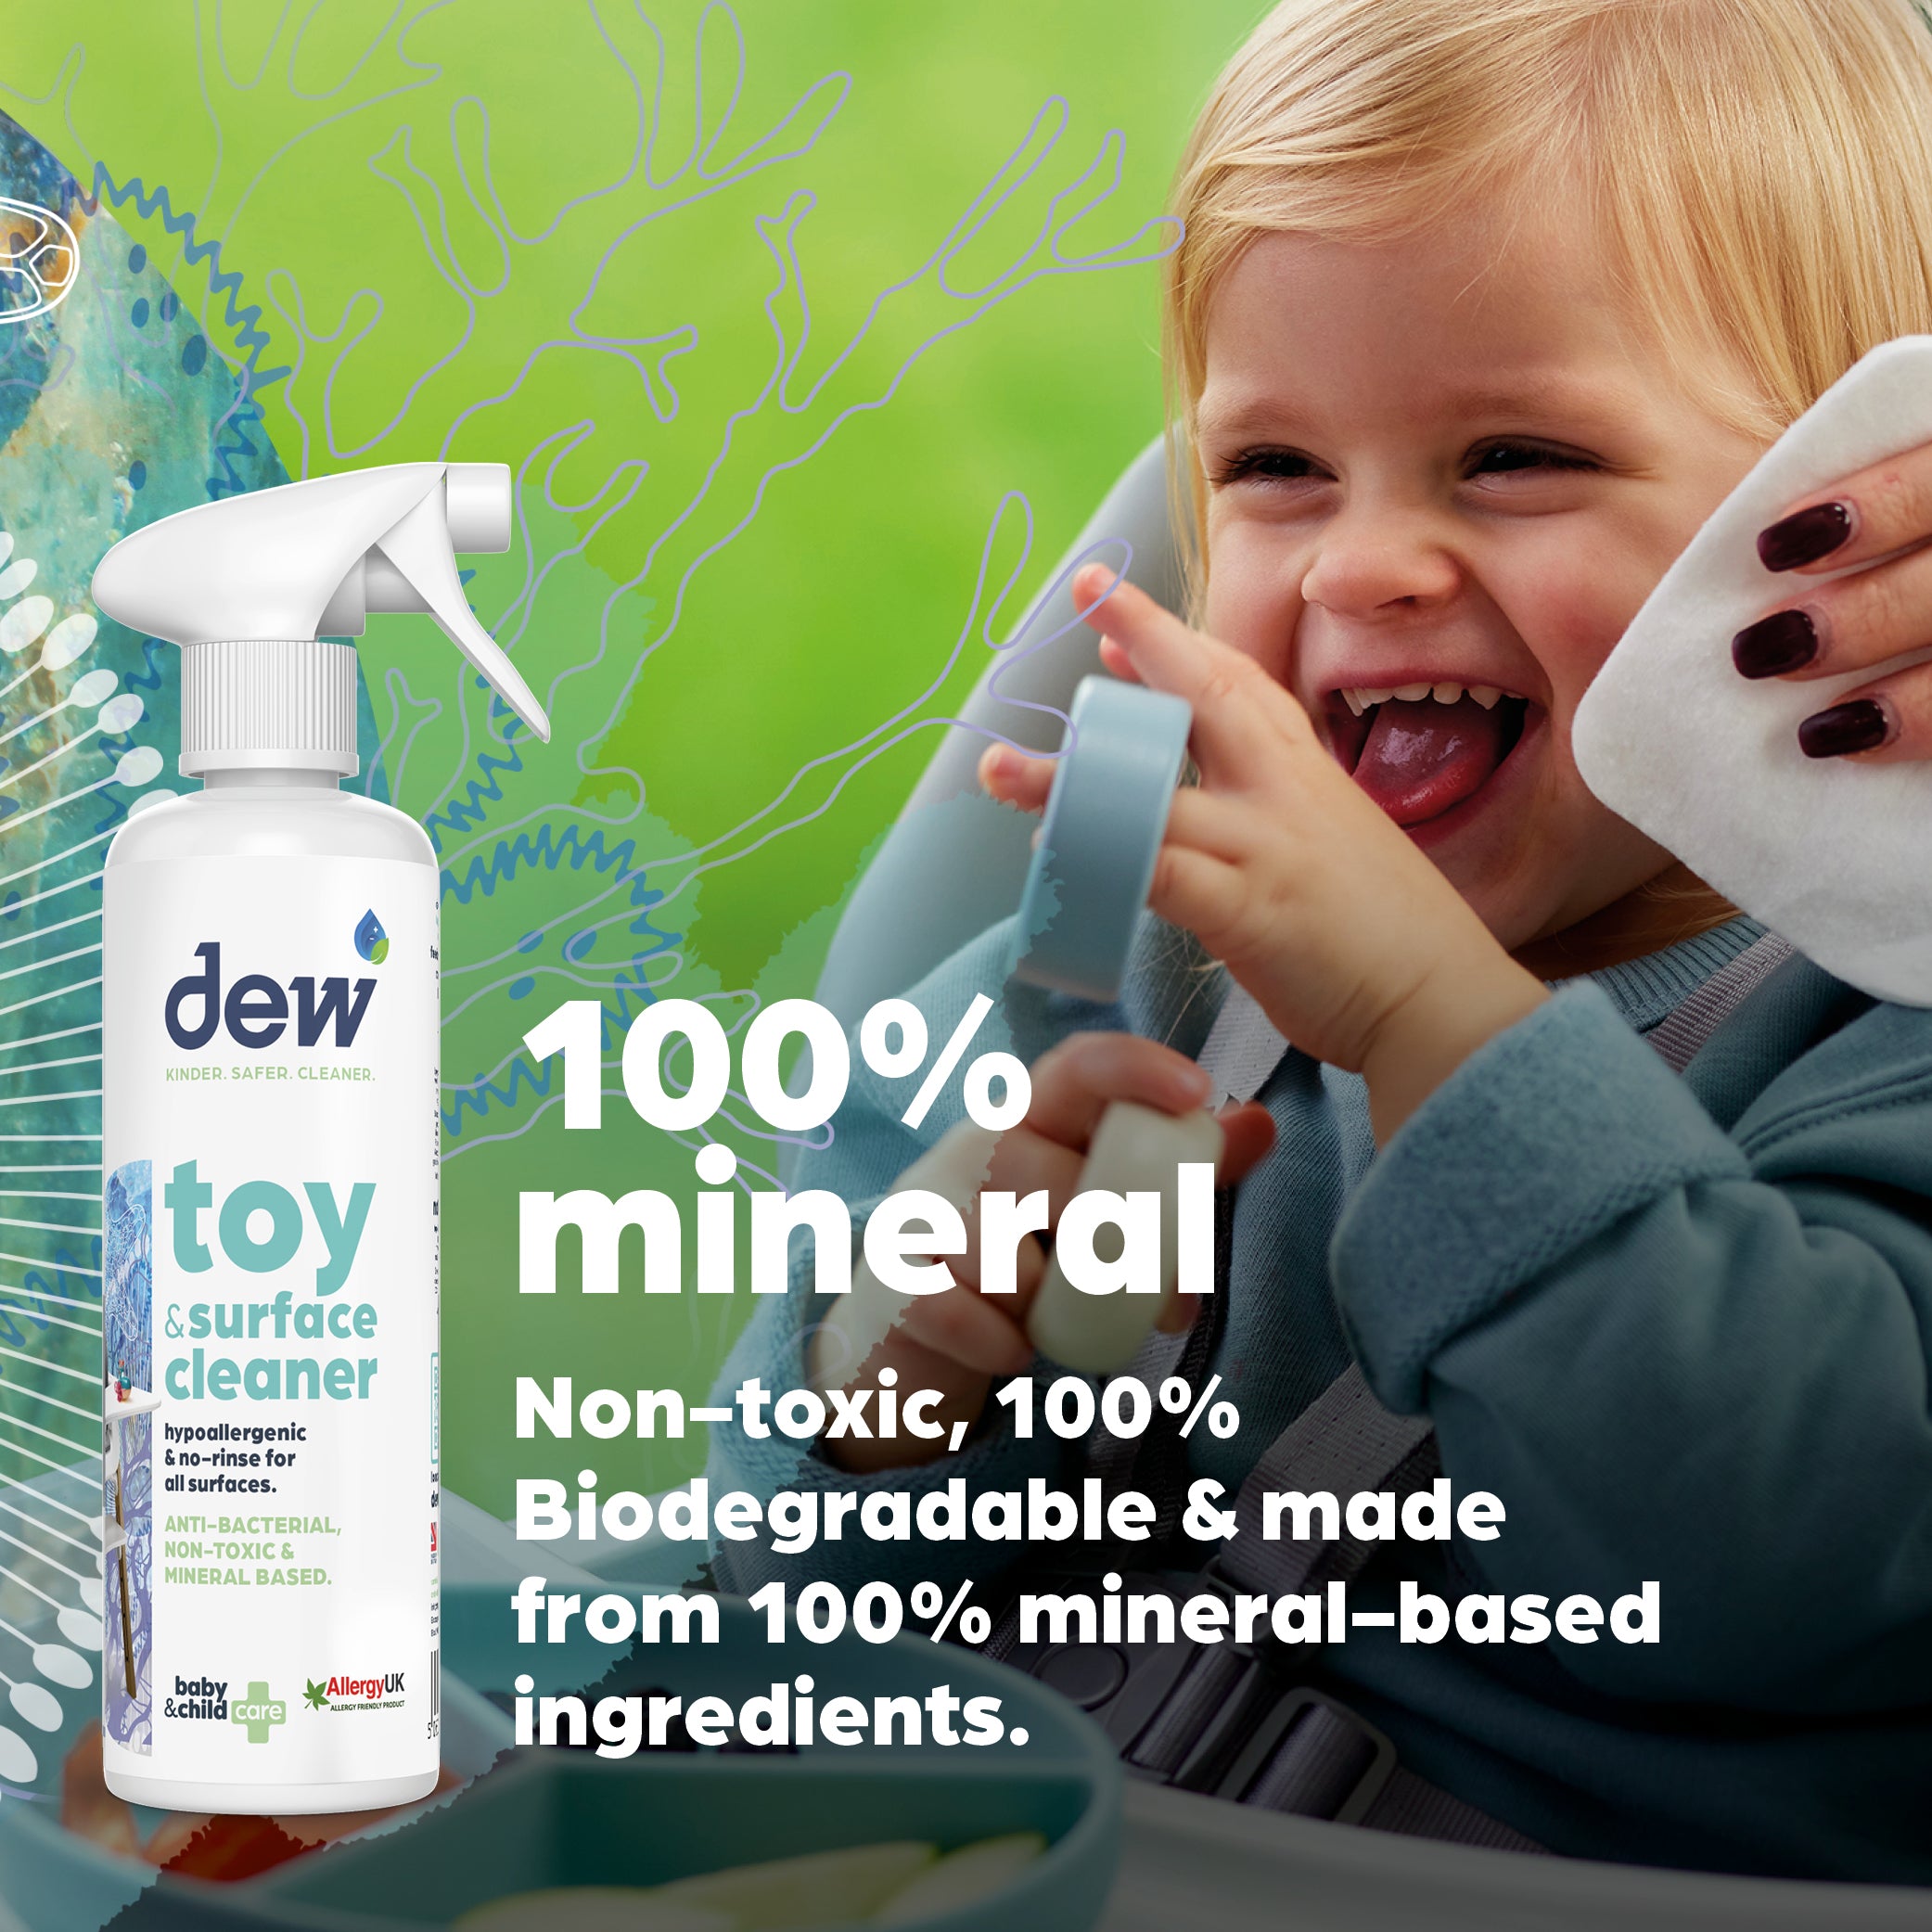 Toy & Surface Cleaner - 100% Mineral